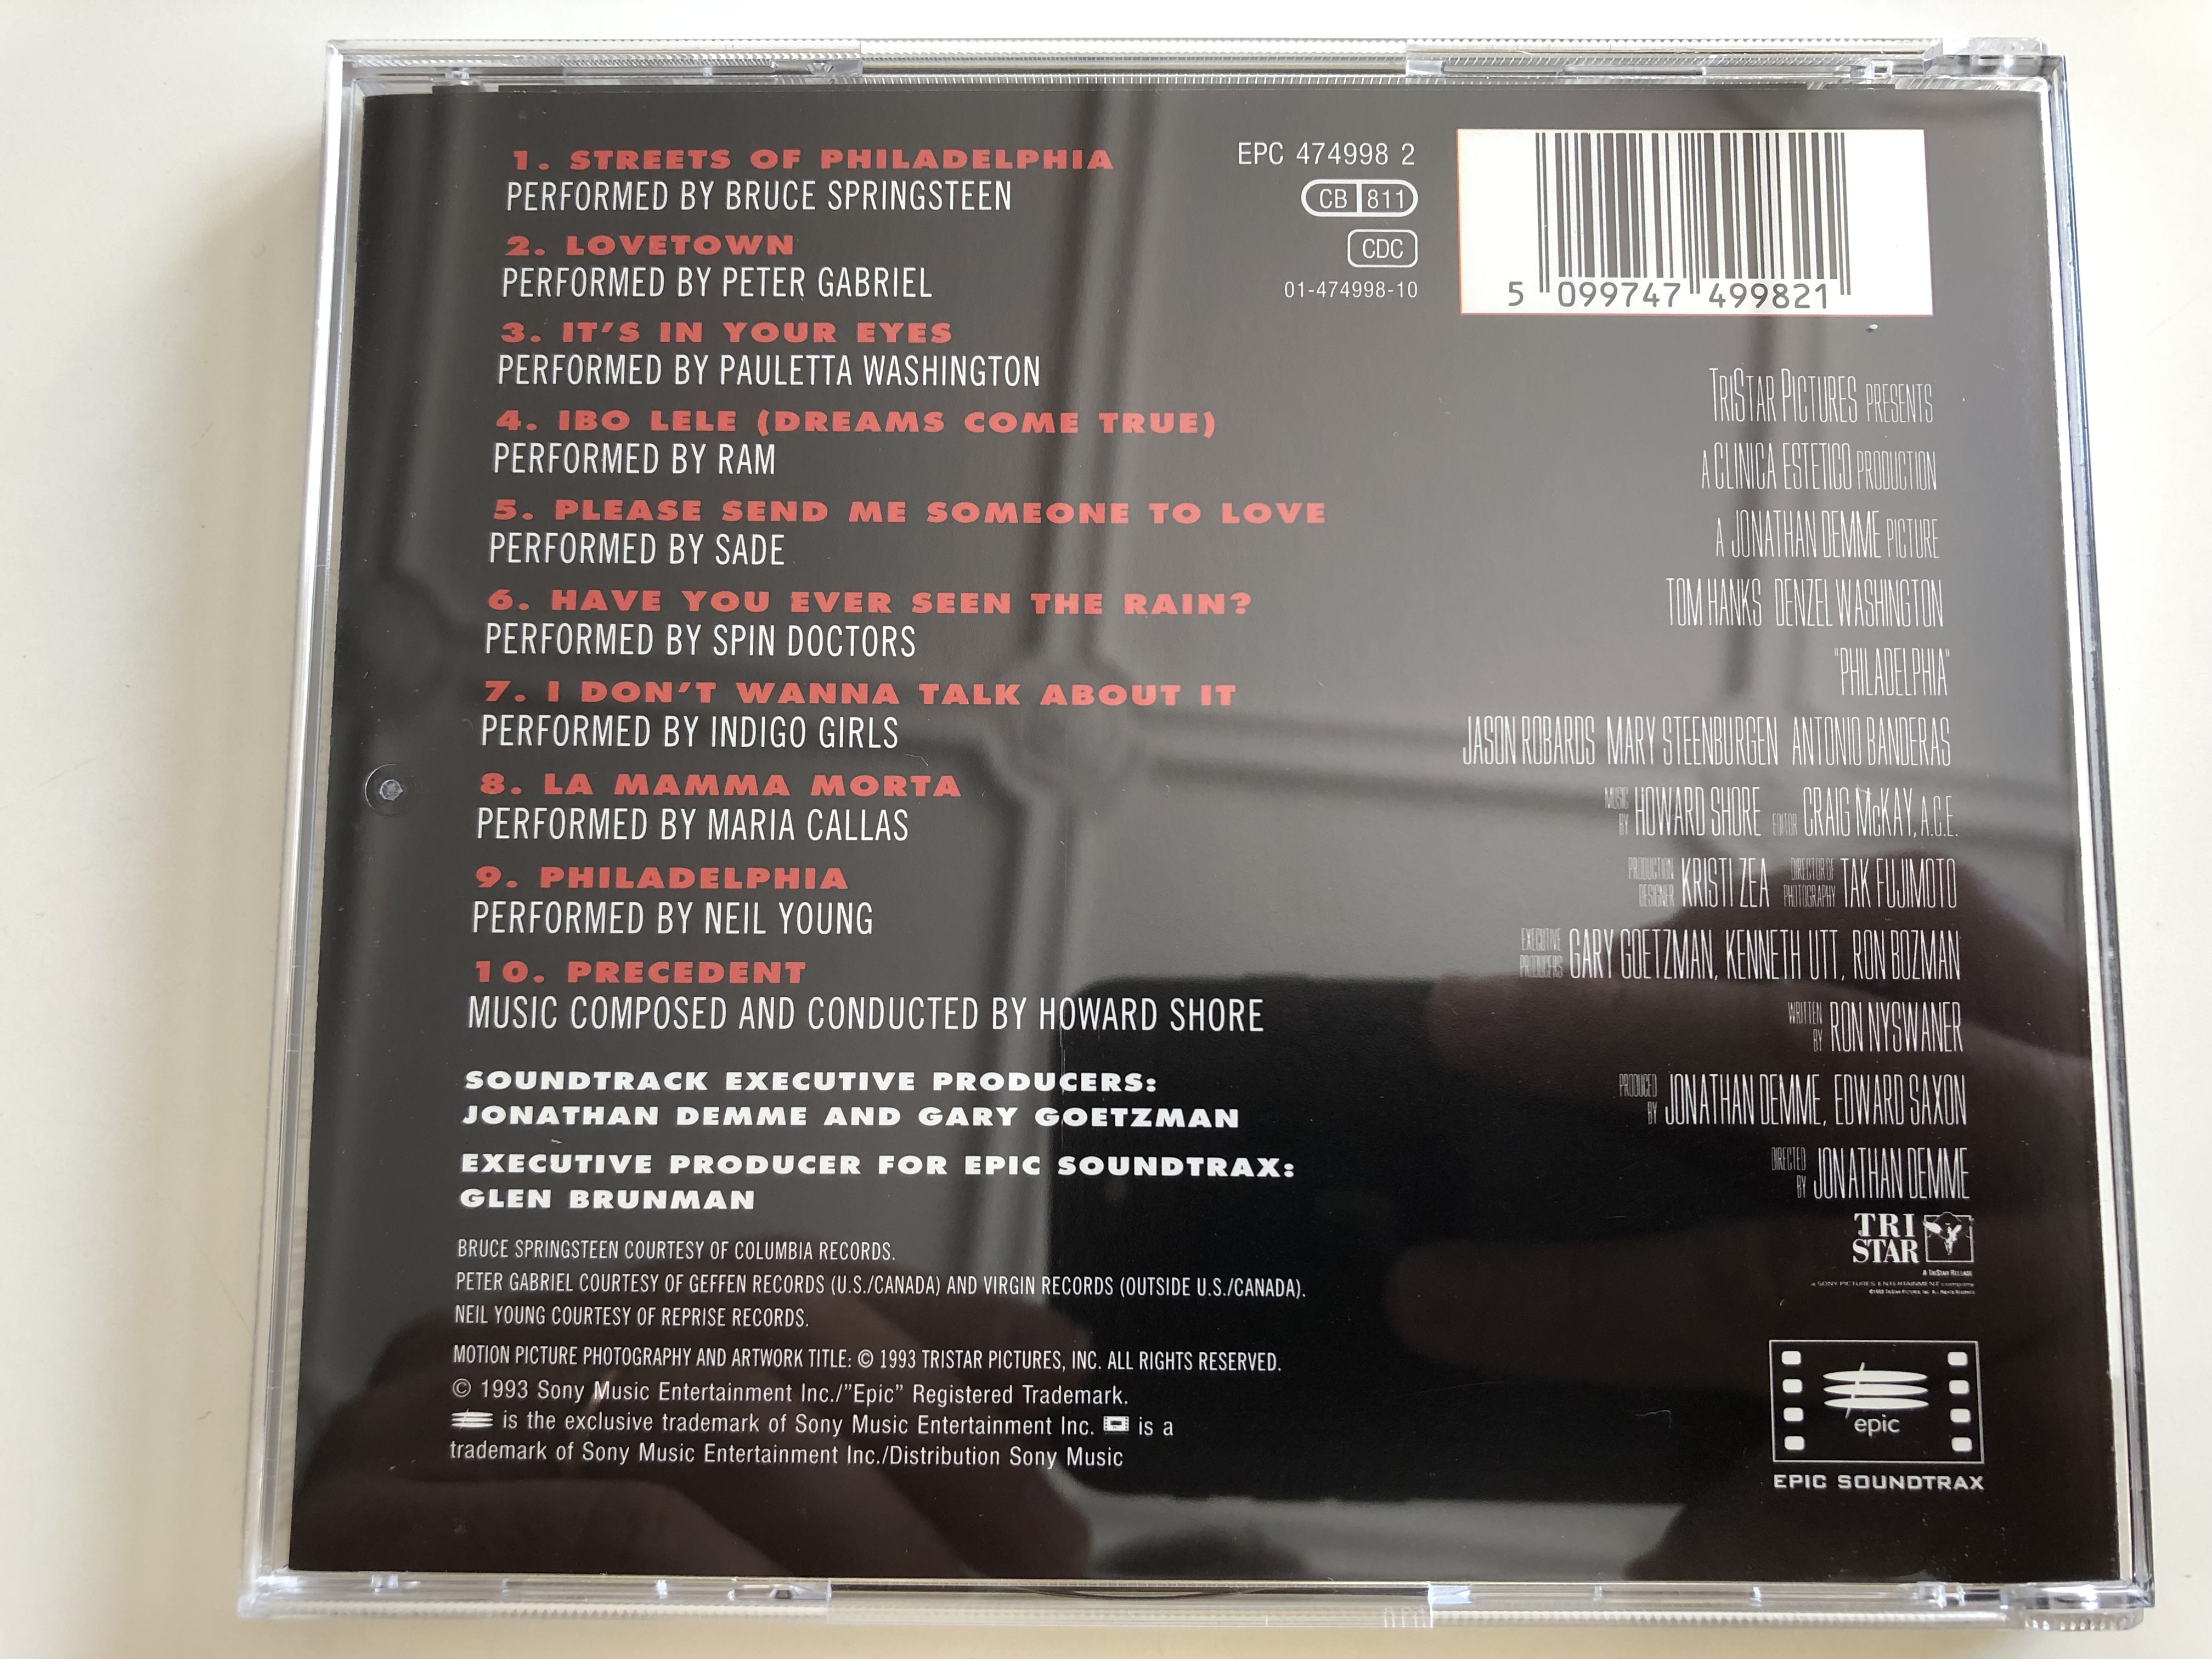 philadelphia-music-from-the-motion-picture-bruce-springsteen-neil-young-sade-peter-gabriel-maria-callas-audio-cd-1993-epc-474998-2-4-.jpg